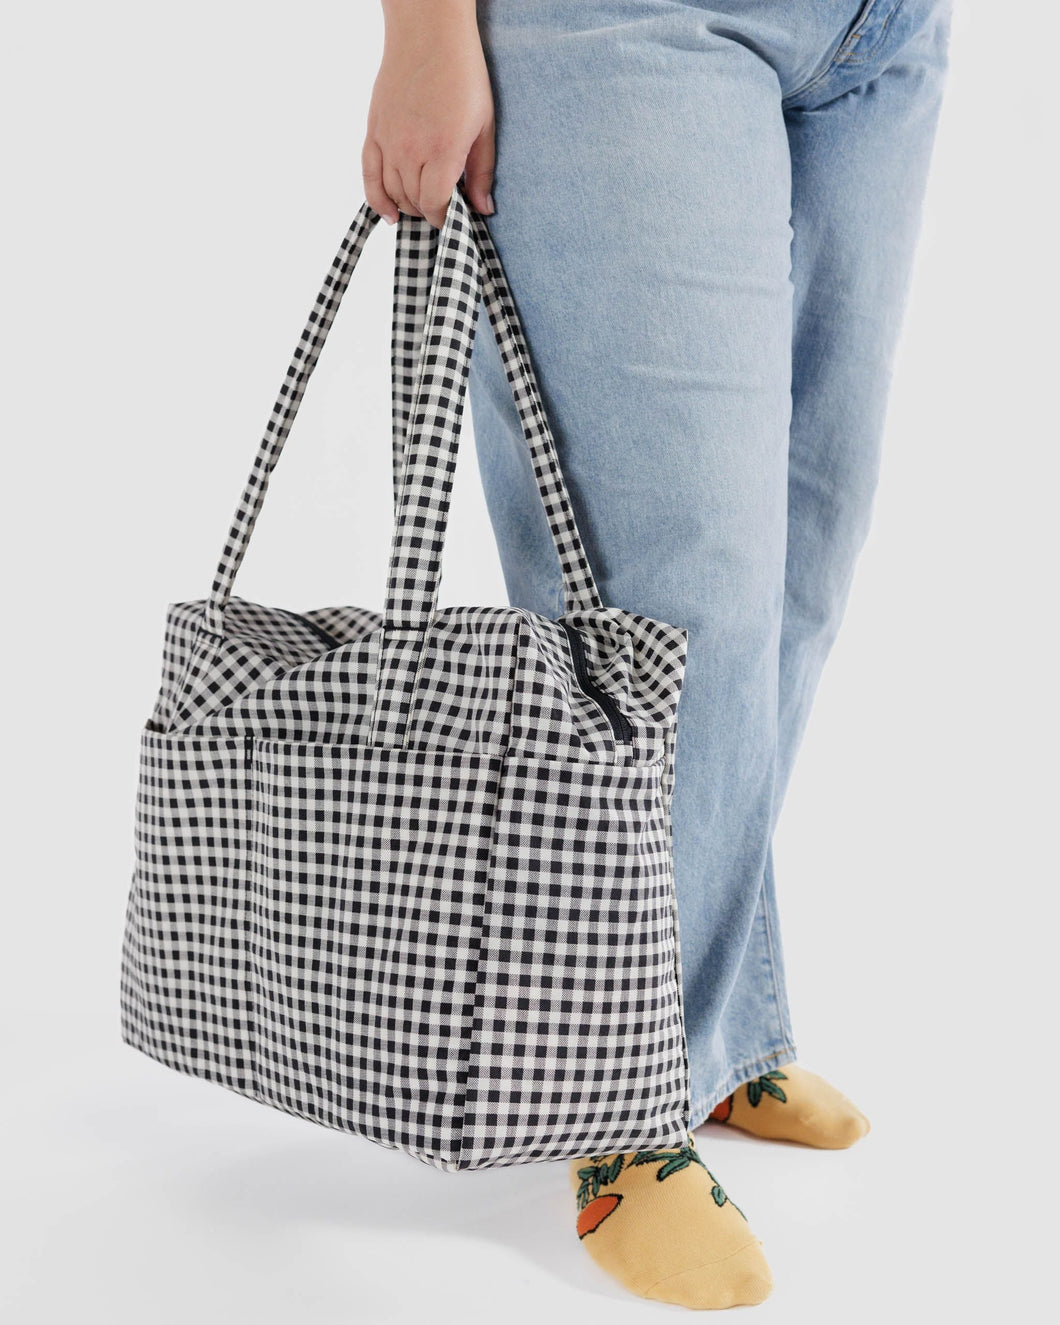 baggu - carry-on cloud bag - black and white gingham